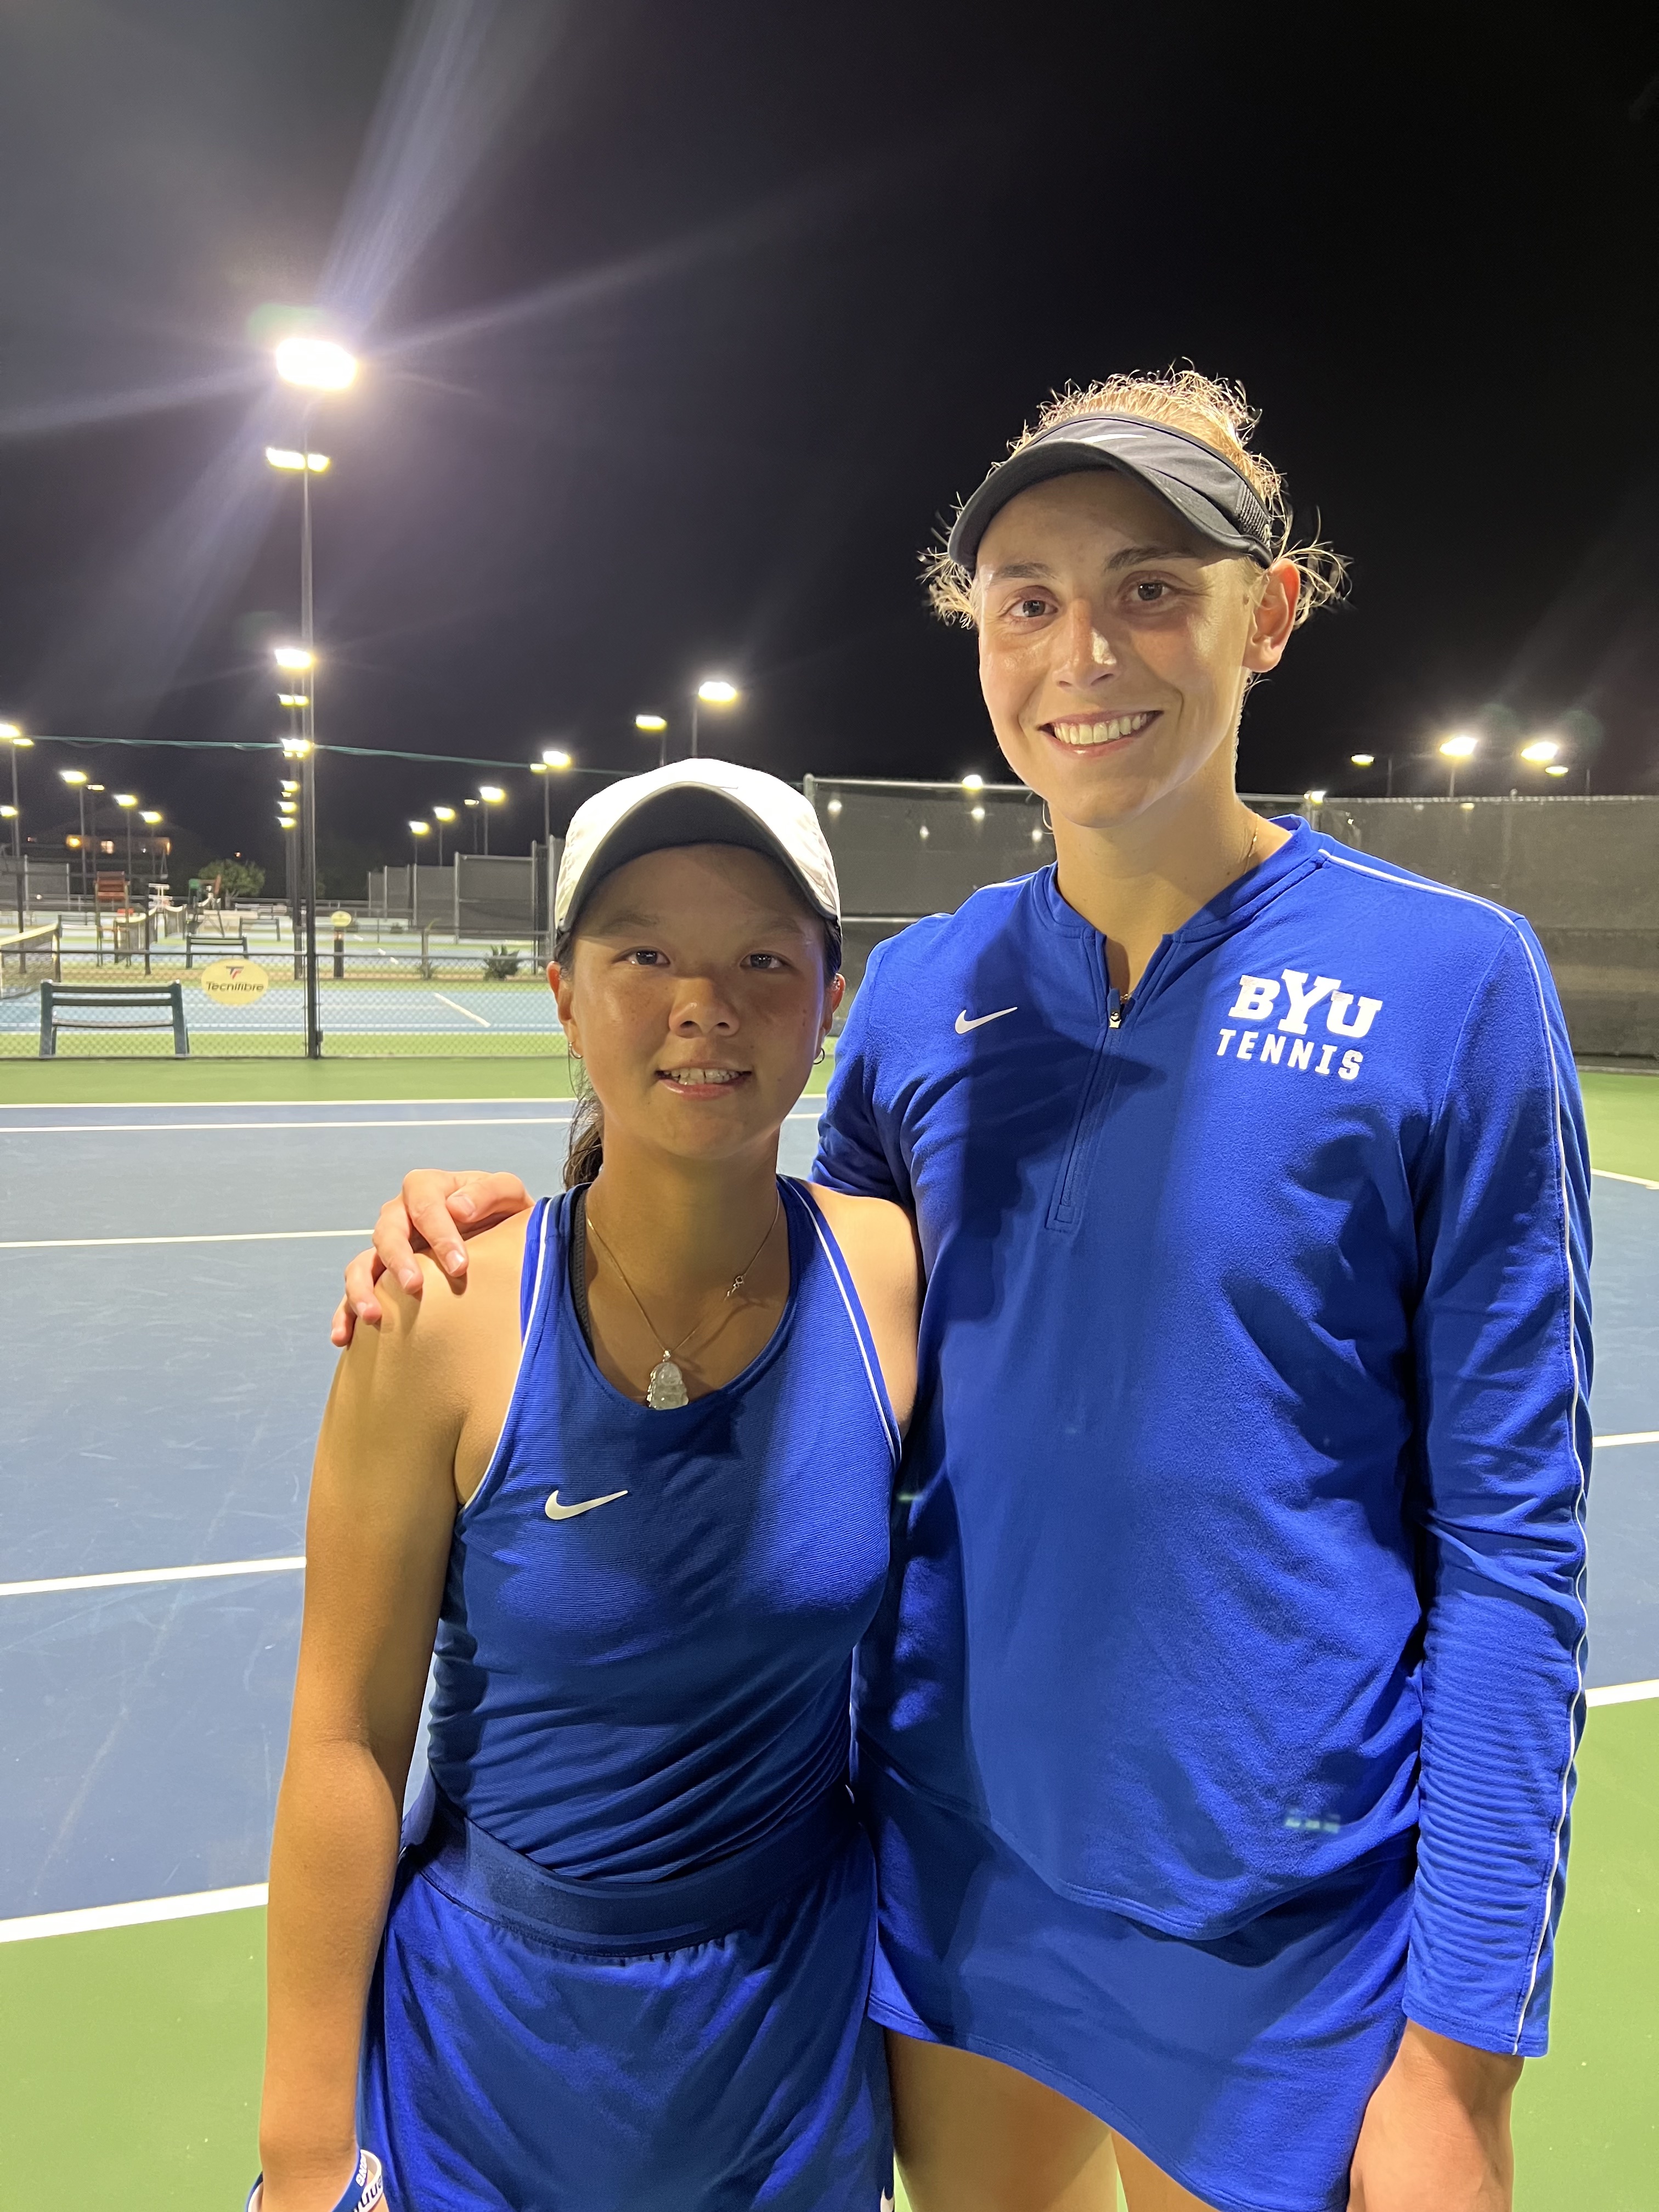 Bobo and Emilee after their match against Michigan